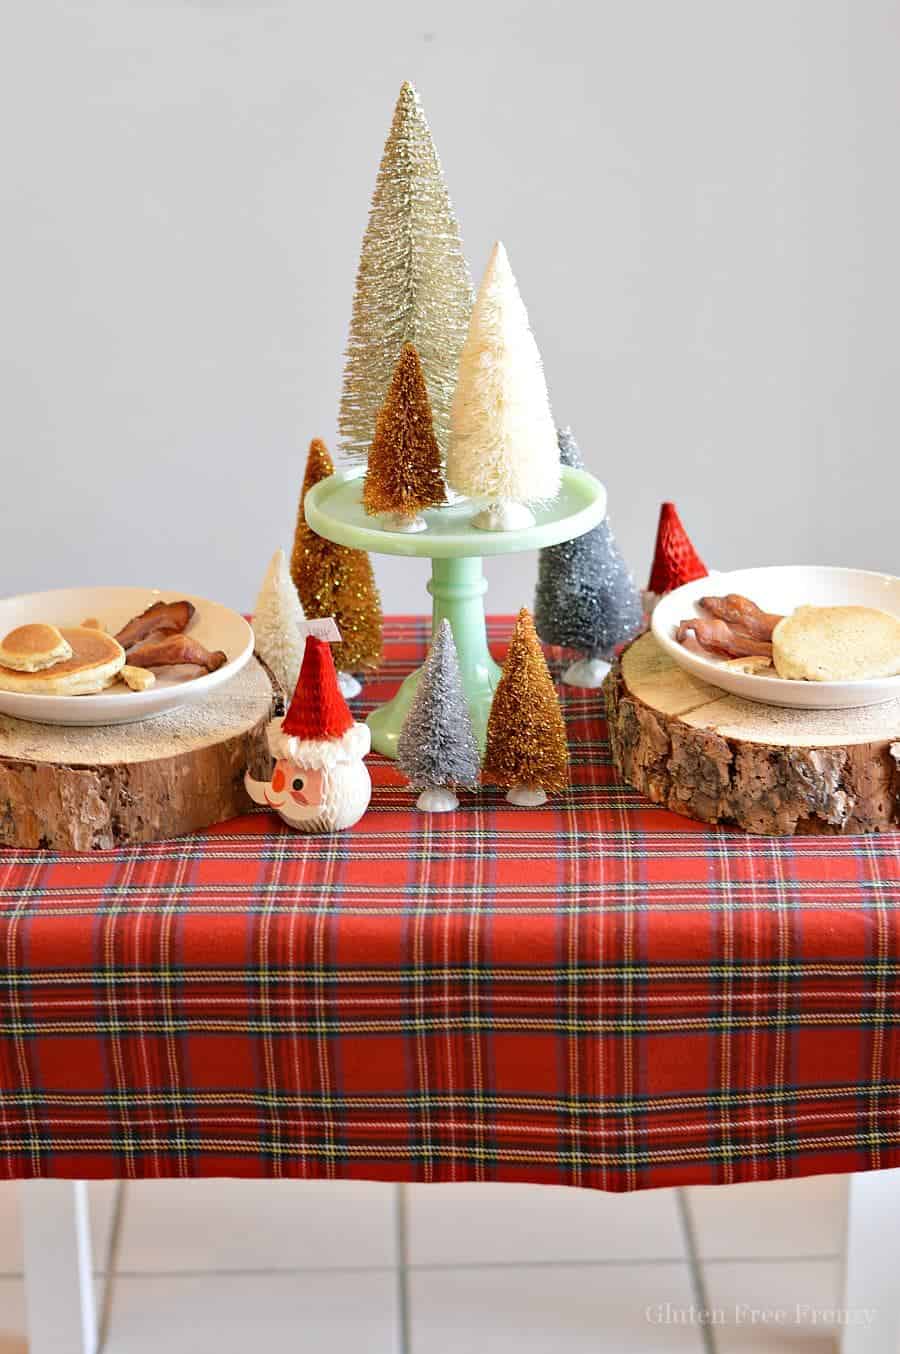 This gluten-free mini reindeer pancake party is both whimsical and tasty. Kids will love how tiny and tasty everything is at this holiday breakfast.